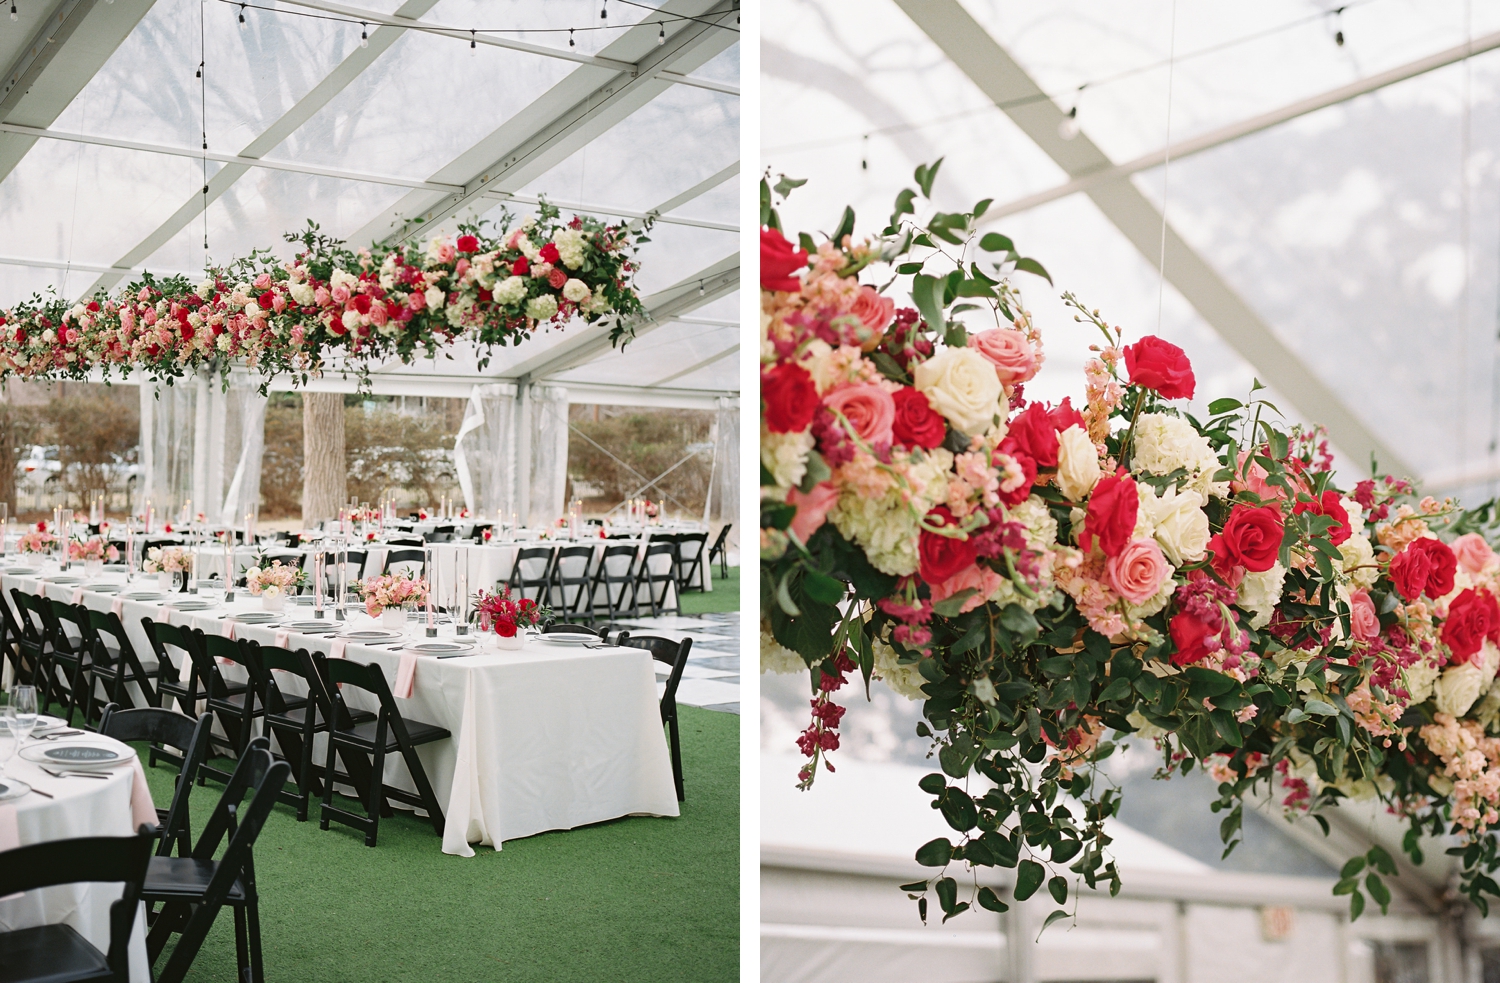 How to budget for your luxury floral wedding in Austin, Texas from a wedding florist. | Austin Wedding Floral Designer | Reiley + Rose